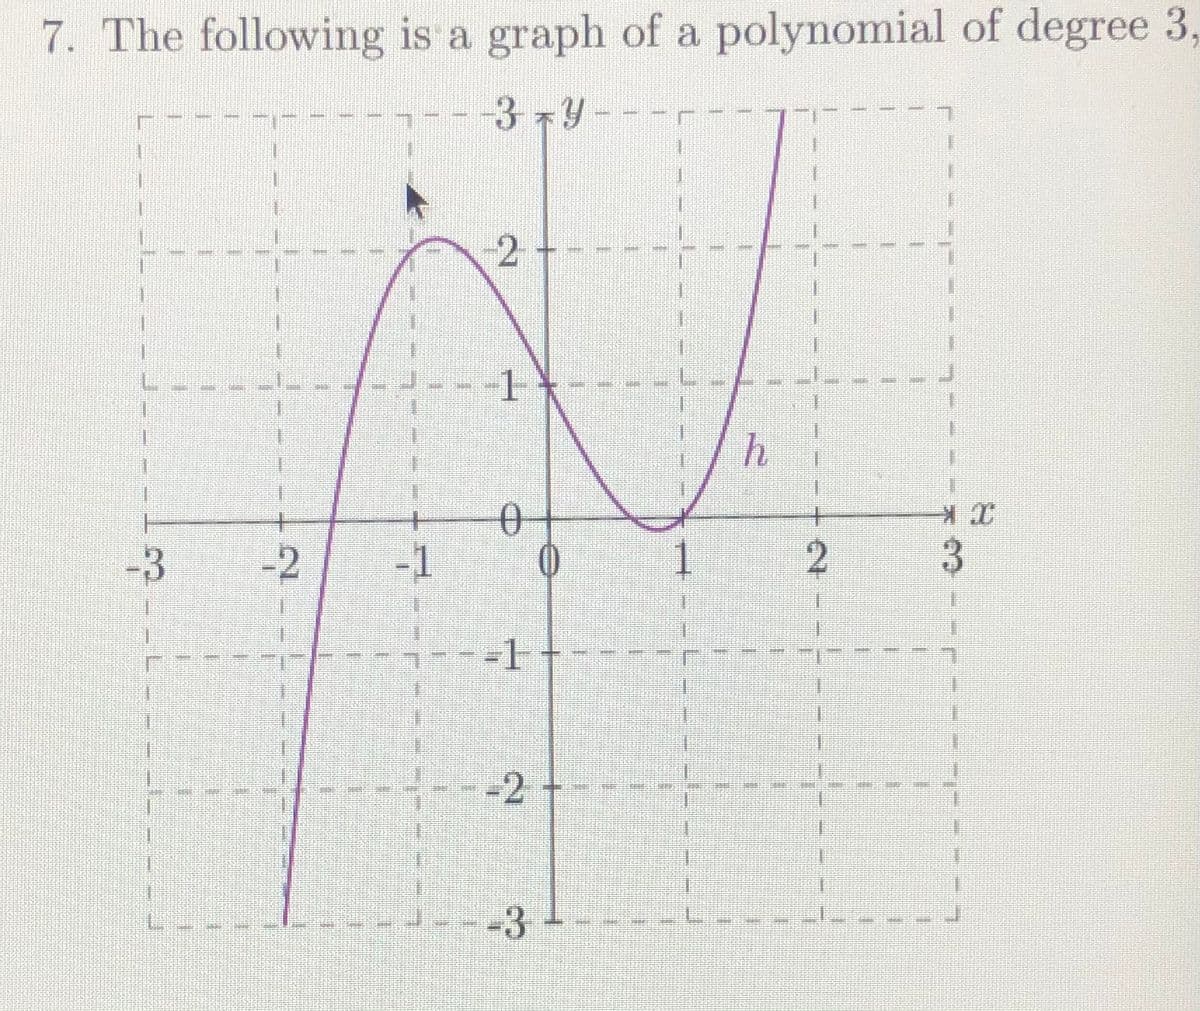 7. The following is a graph of a polynomial of degree 3,
-374
-2-
1
一
十
+
-3
-2
-1
1
3
-1+-
---2
-3
